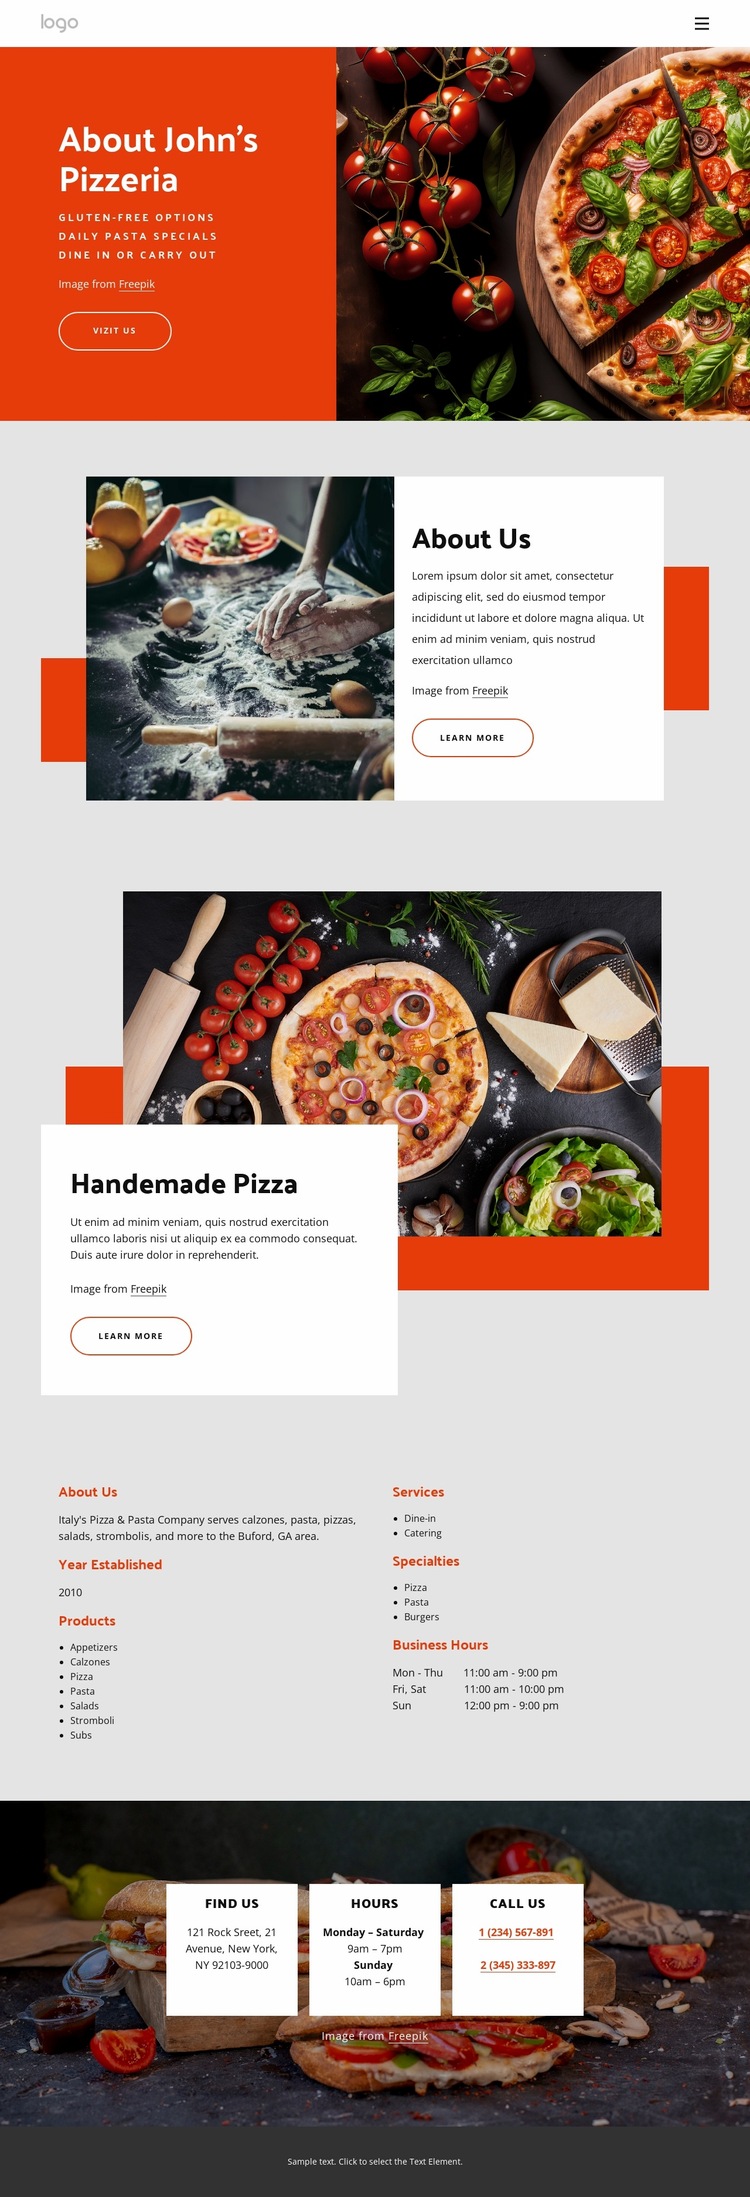 About our pizzeria Website Builder Templates